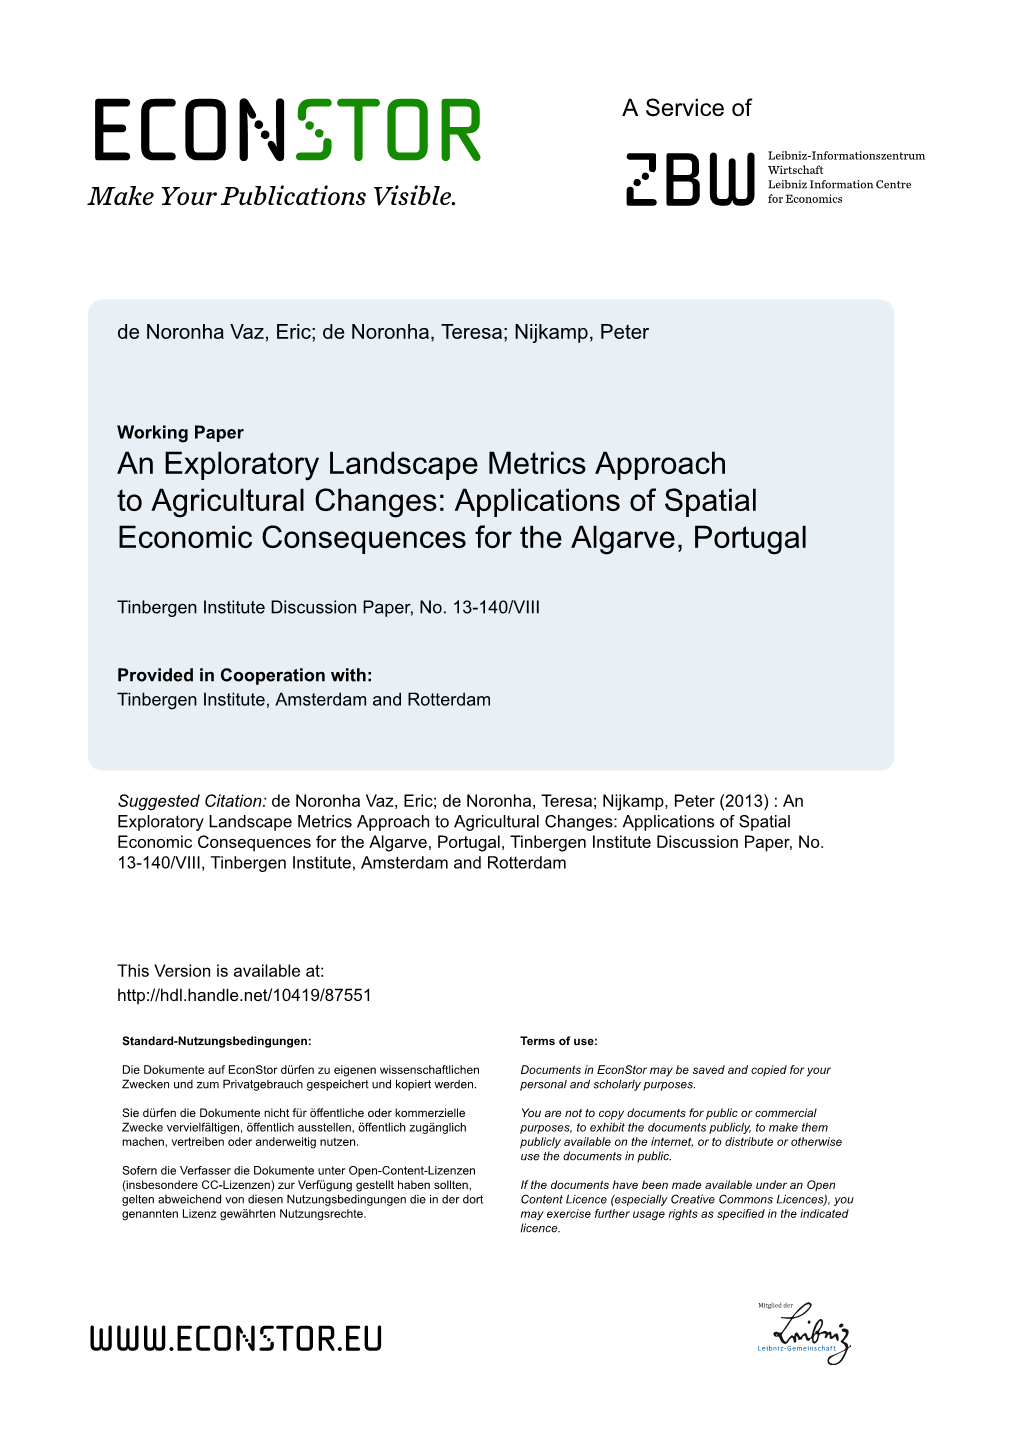 An Exploratory Landscape Metrics Approach to Agricultural Changes: Applications of Spatial Economic Consequences for the Algarve, Portugal